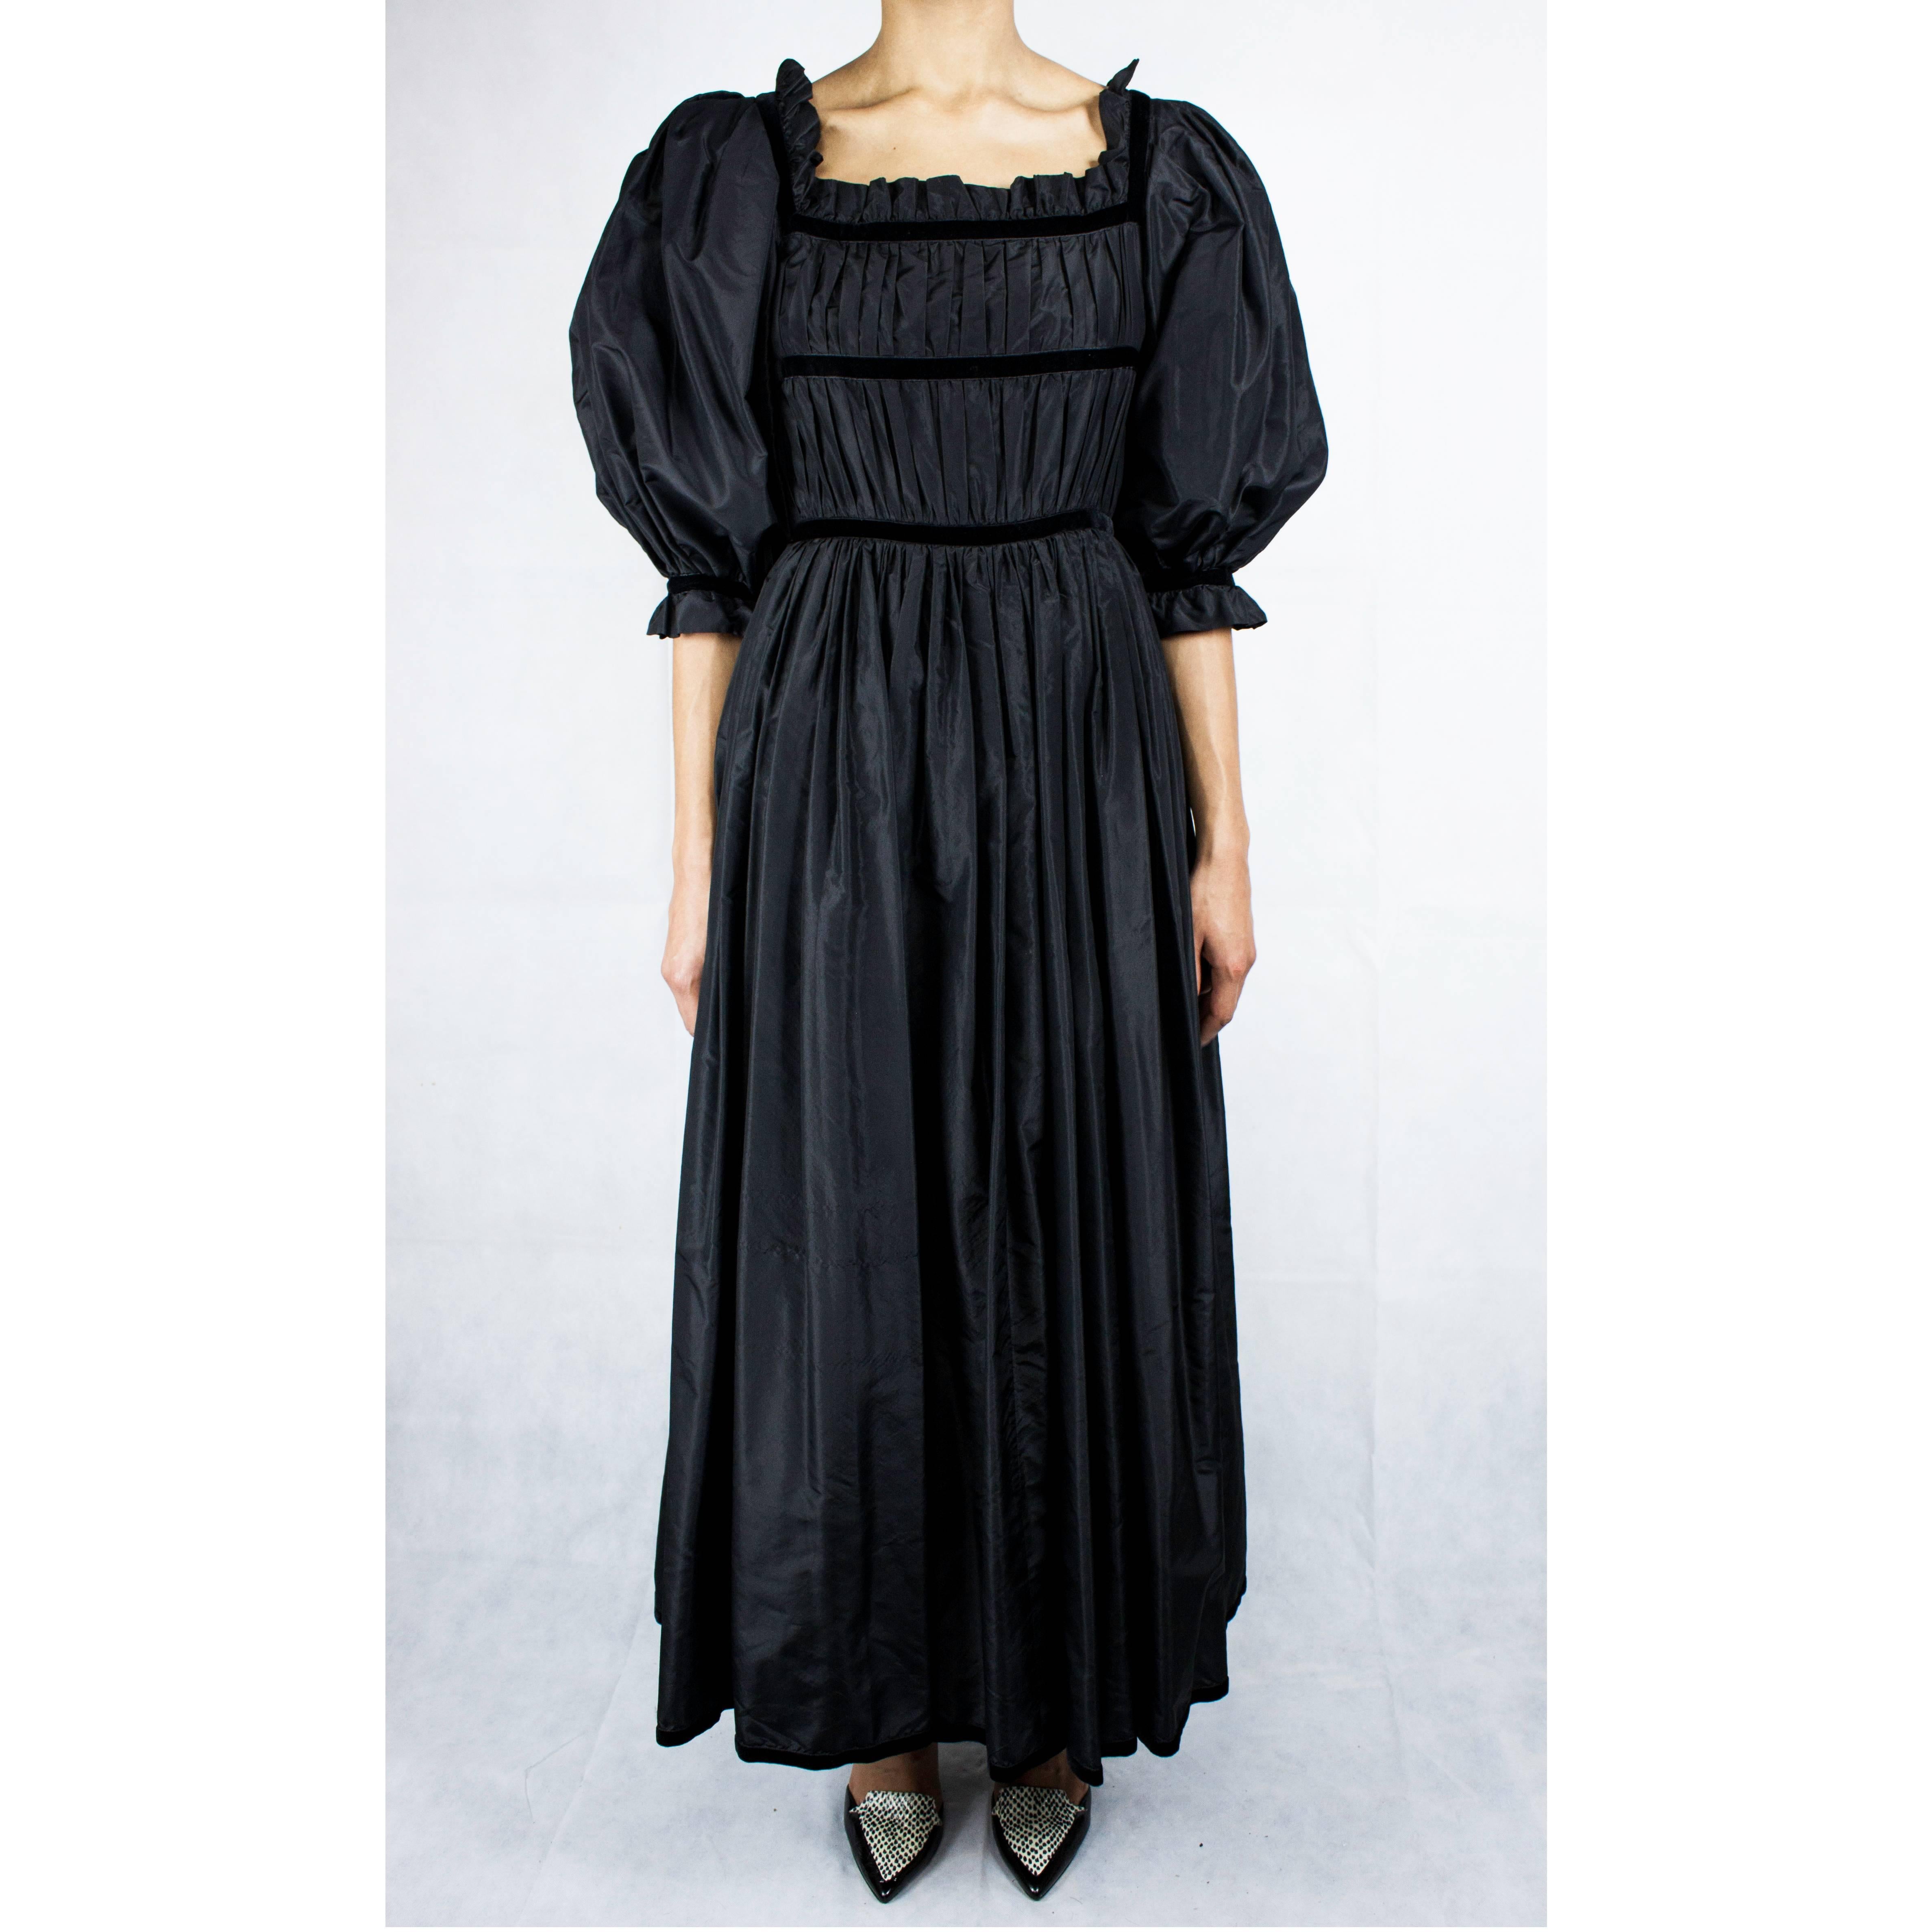 
This beautiful black taffeta evening gown, circa 1970 although quiet in style evokes timeless elegance.
Every details is designed to celebrate unapologetic femininity.
Constructed from opulent taffeta material. The gathered skirt is ample and